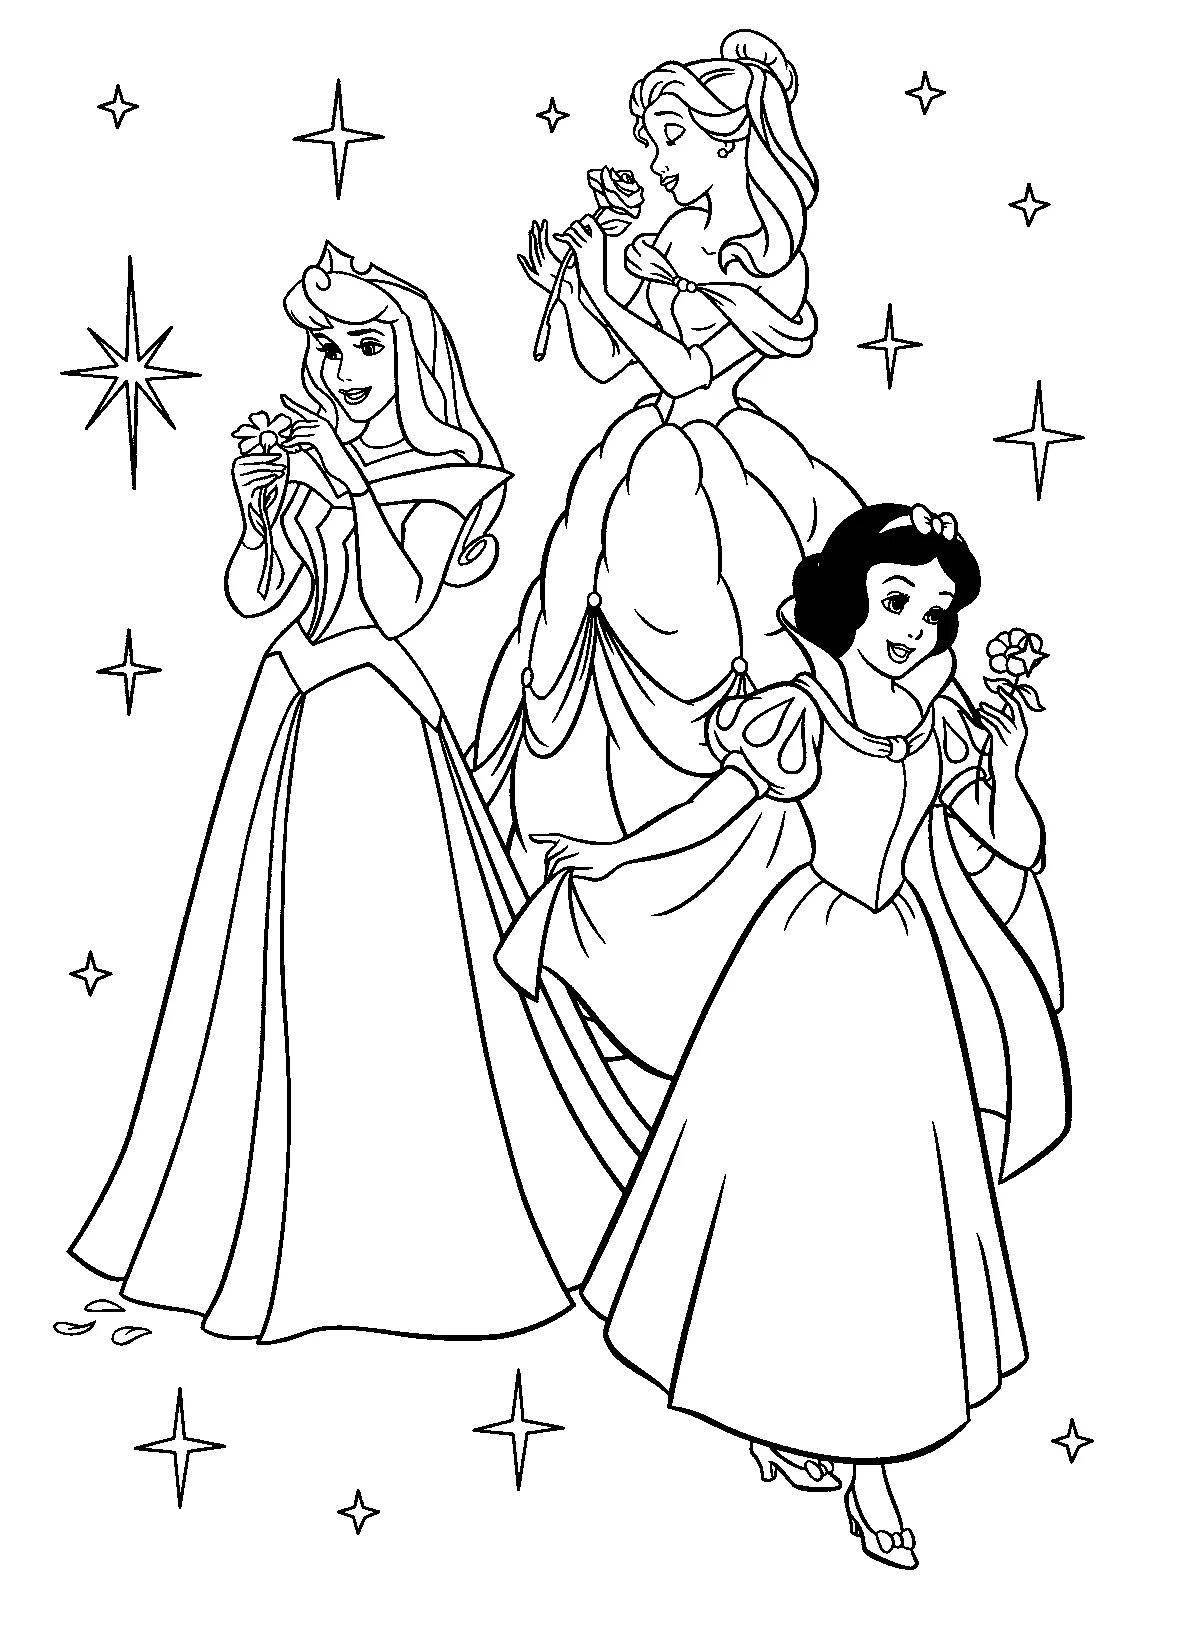 Charming coloring game with disney princesses